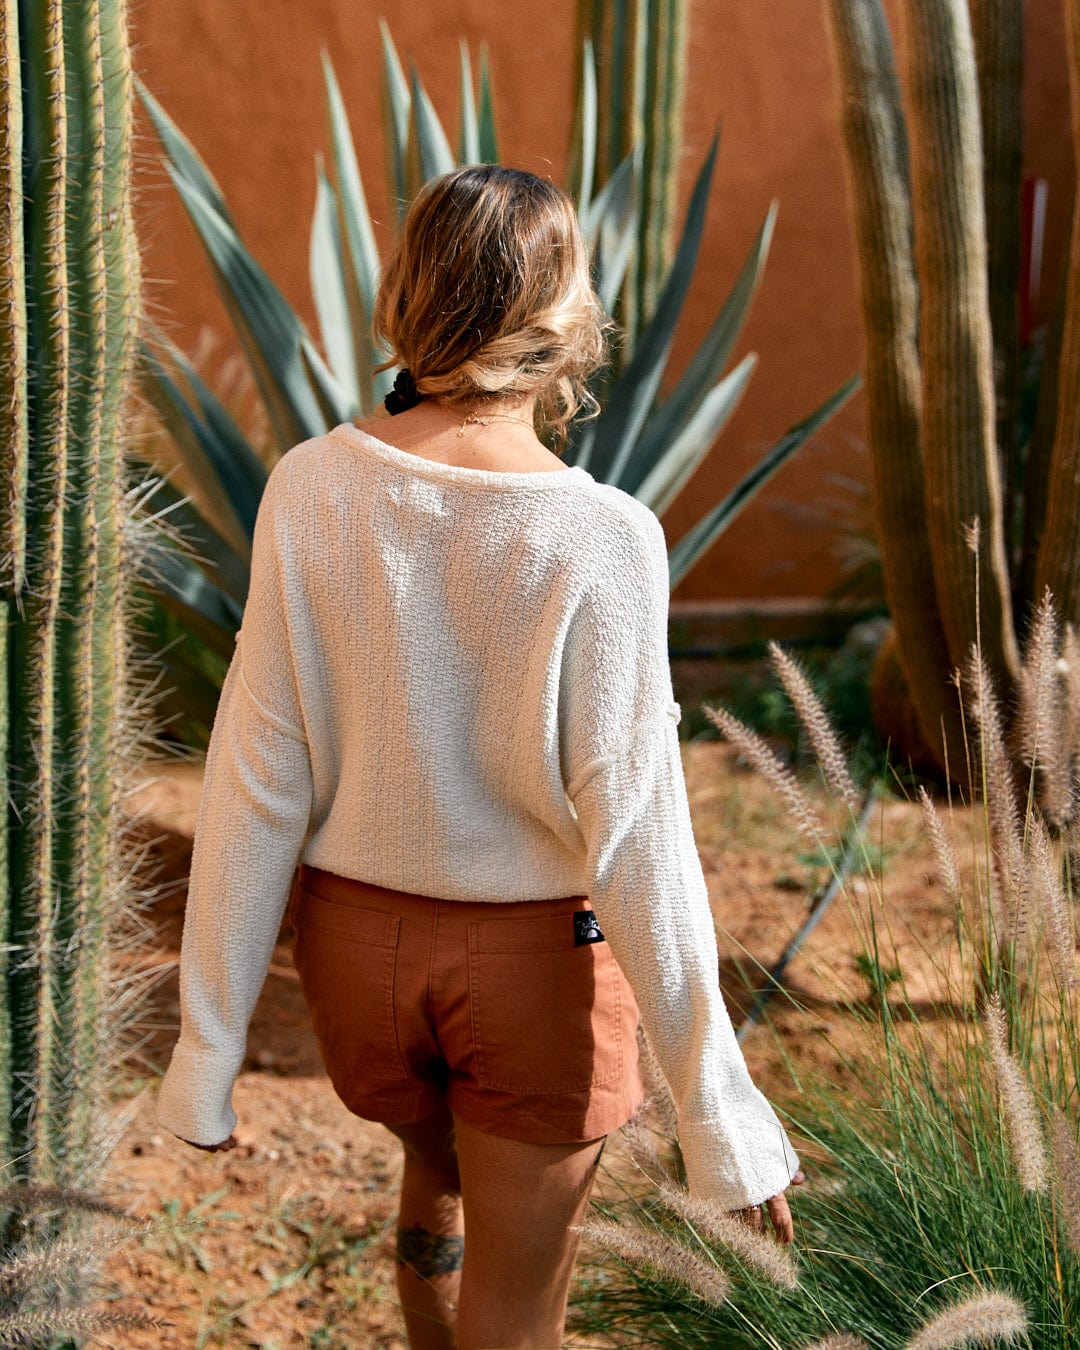 A woman in a Saltrock Beachcomber - Womens Tie Waist Jumper in Cream and brown shorts standing in front of tall cacti, viewed from behind.